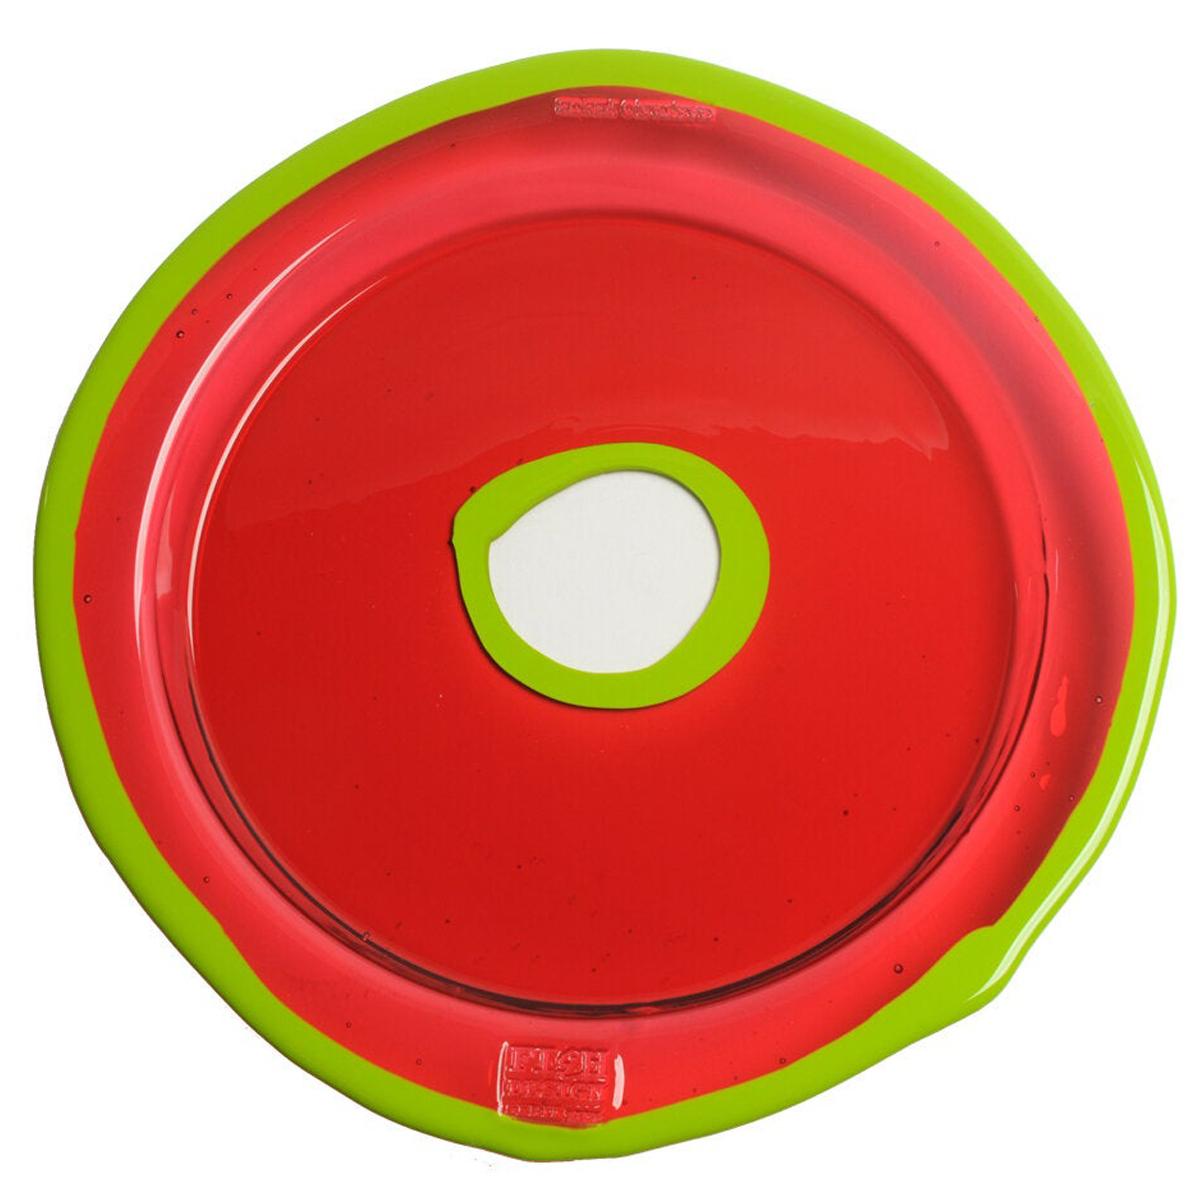 Try-Tray Small Round Tray in Dark Ruby and Matt Acid Green by Gaetano Pesce For Sale